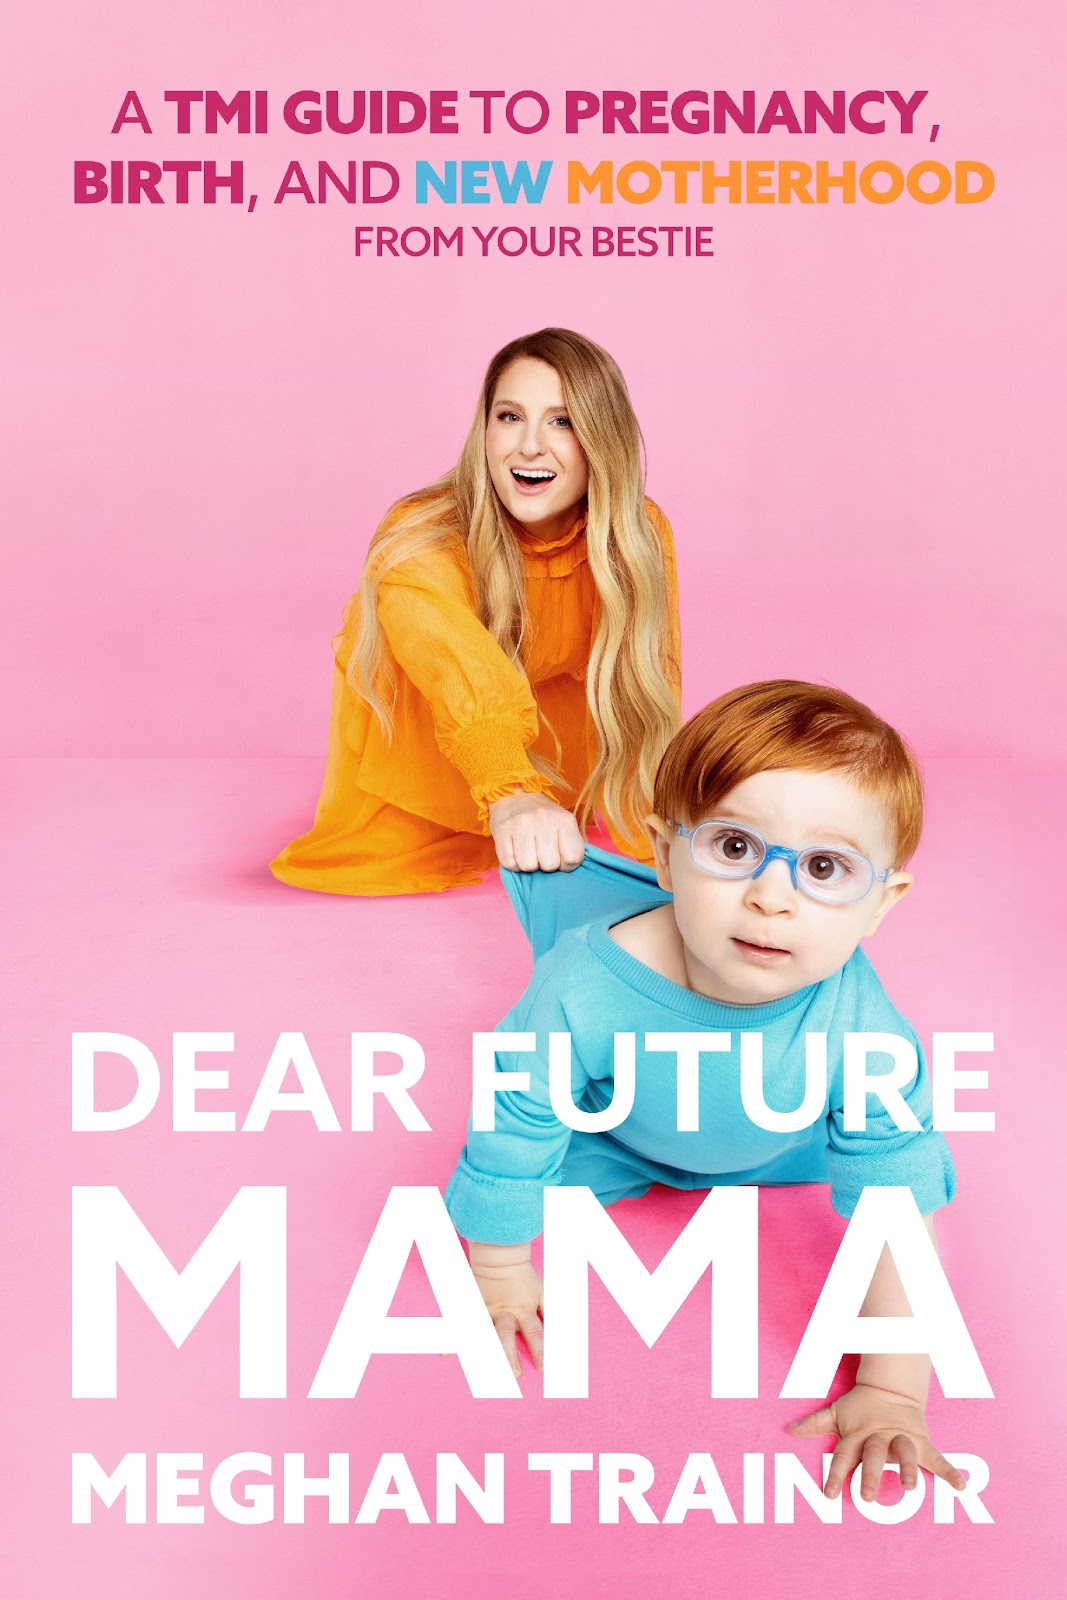 Meghan Trainor - Dear Future Mama: A TMI Guide to Pregnancy, Birth, and New Motherhood from Your Bestie